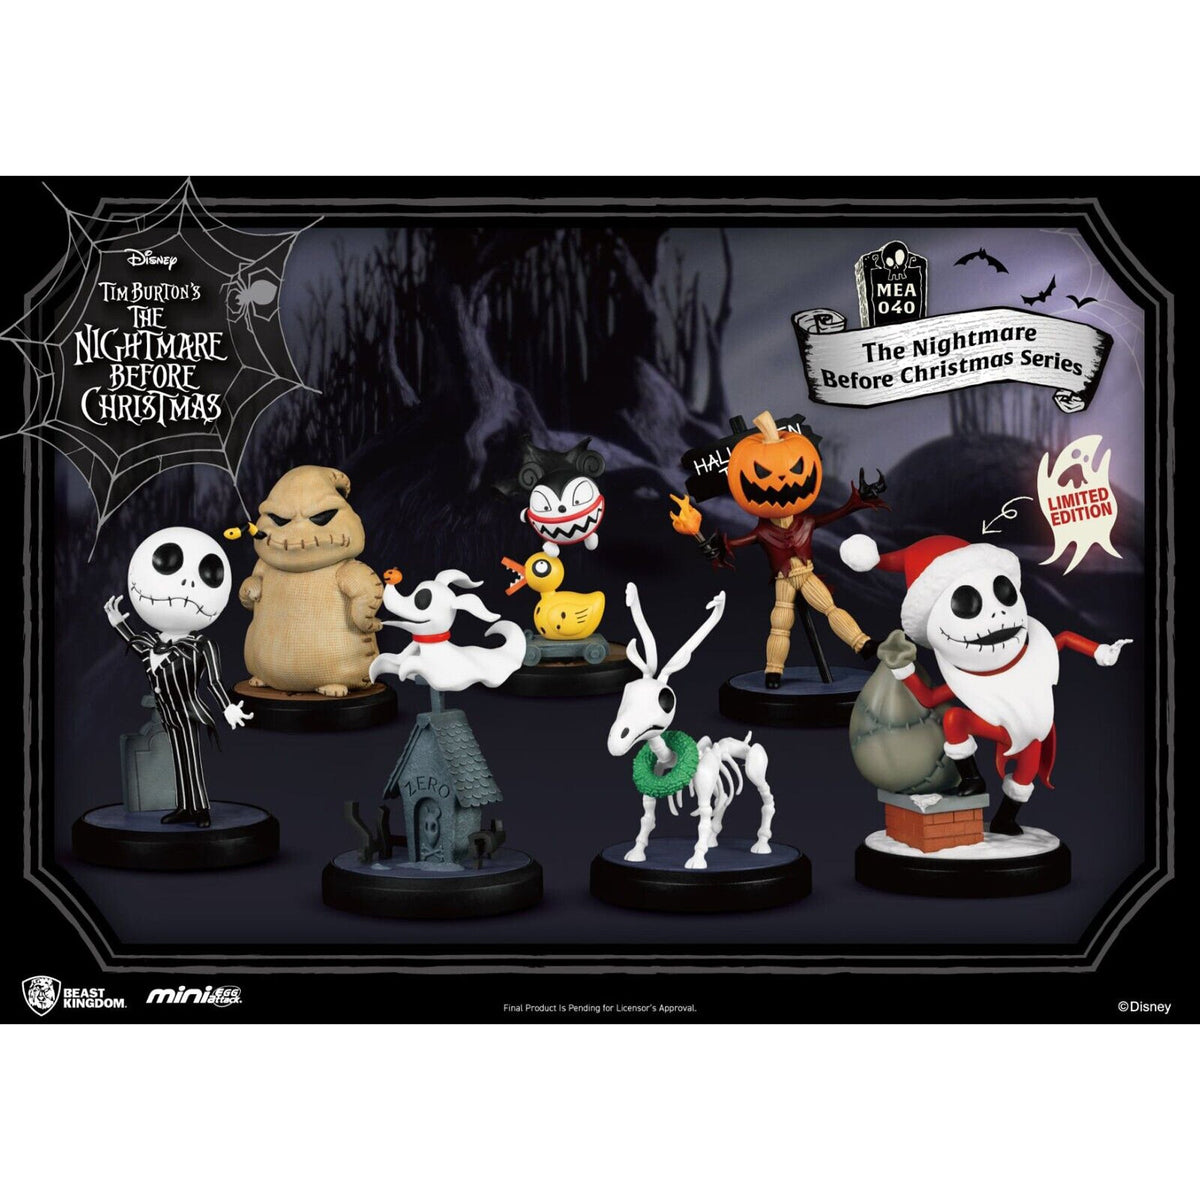 RED PLANET GROUP Toys & Games The Nightmare Before Christmas Collectible Figurines, Classic Series, Assortment, 1 Count